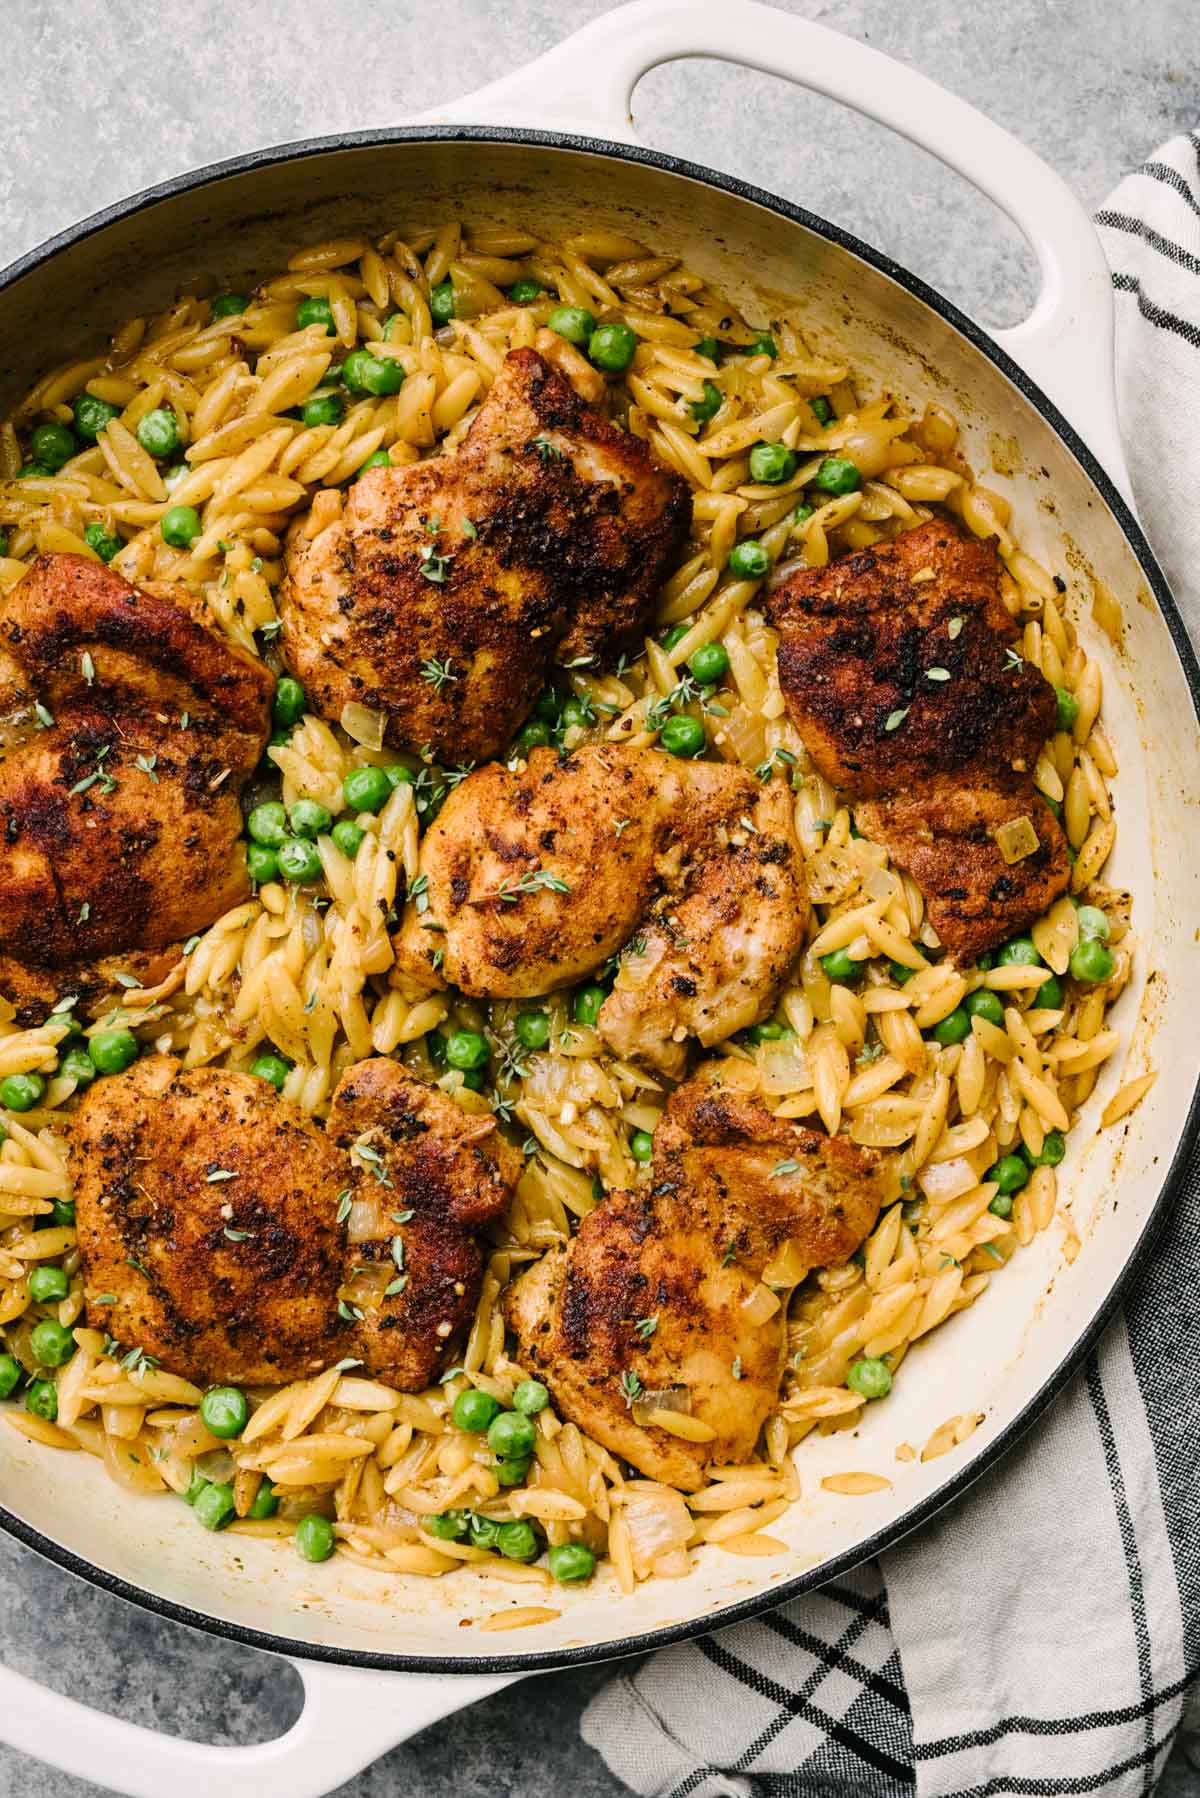 Seared chicken thighs over orzo pasta with peas in a large grey skillet with a striped linen napkin to the side.